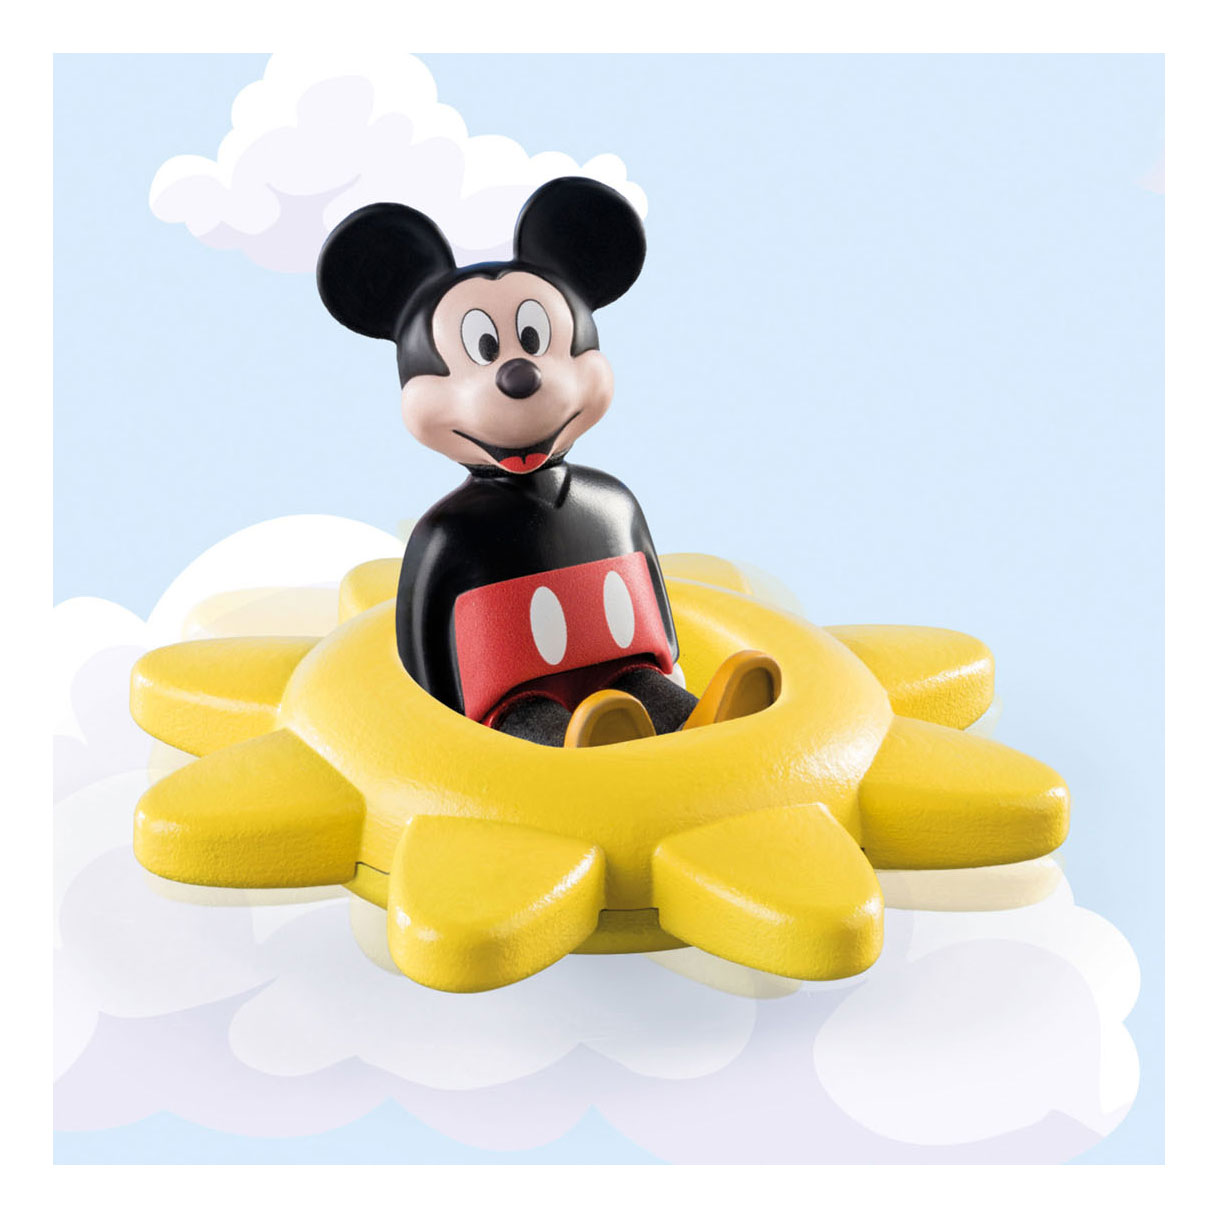 Playmobil 1.2.3. Mickey Mouse Draaiende zon - 71321